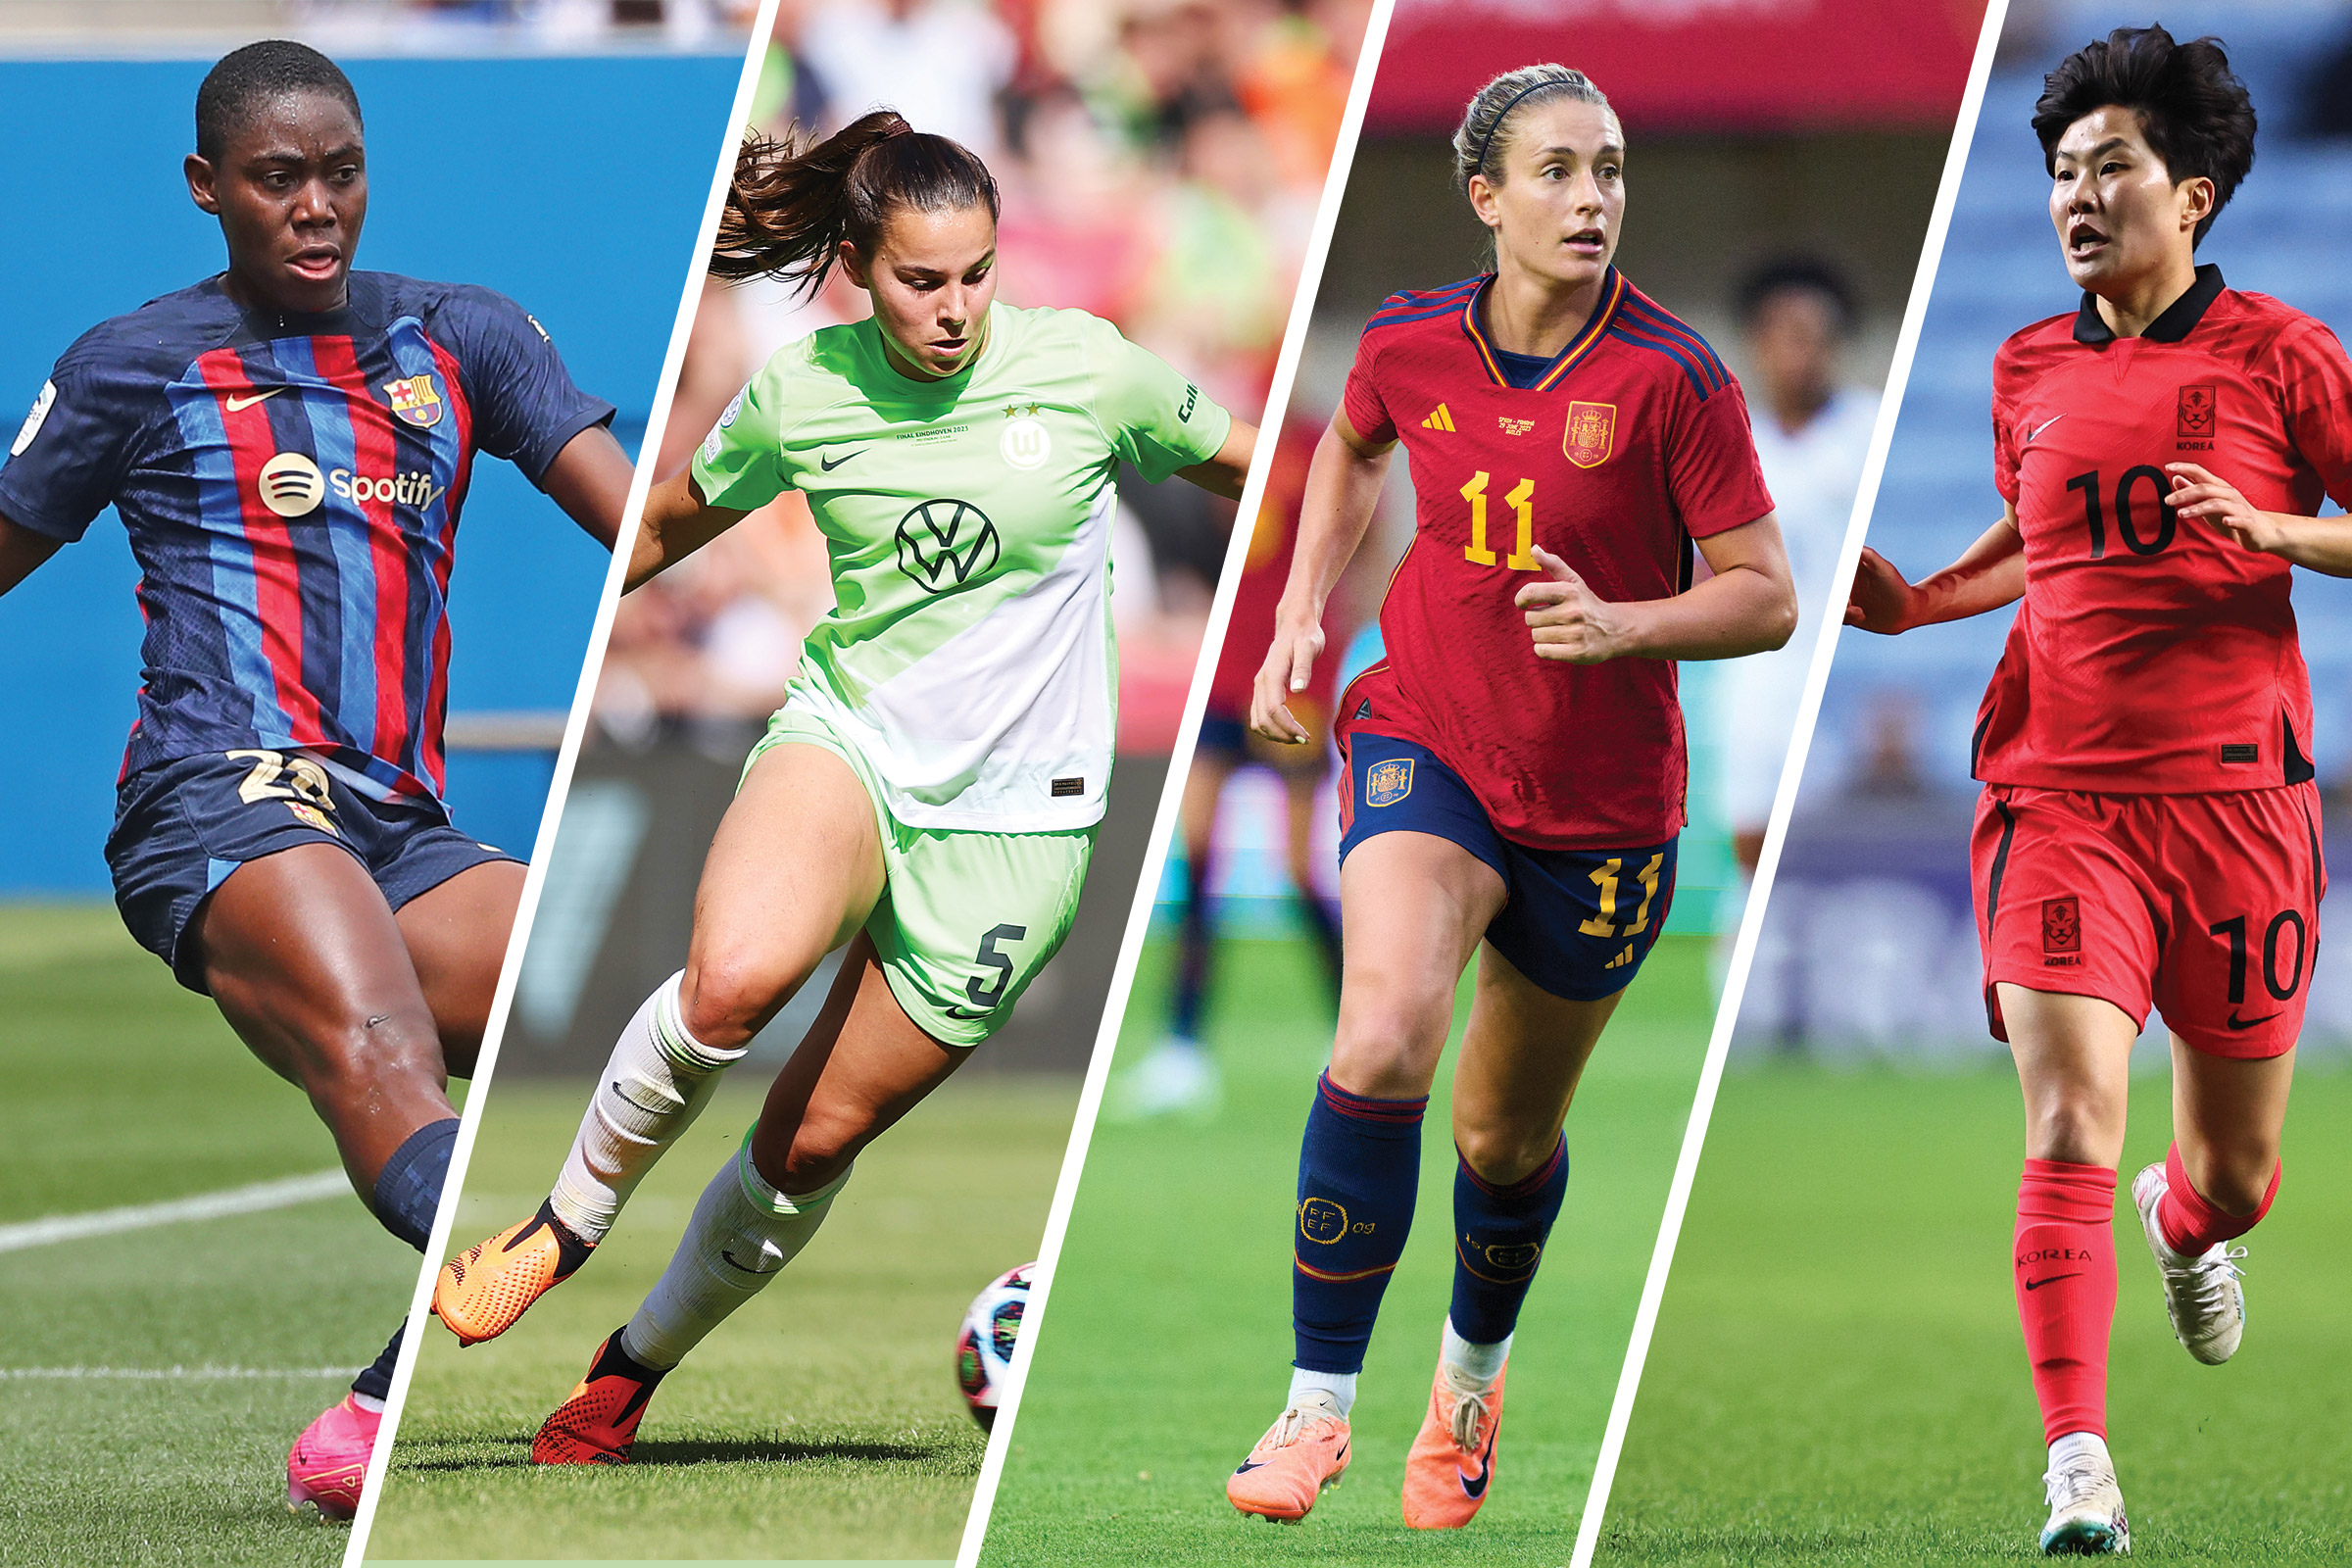 Top 10 Players from the 2022 Women's World Championship - The